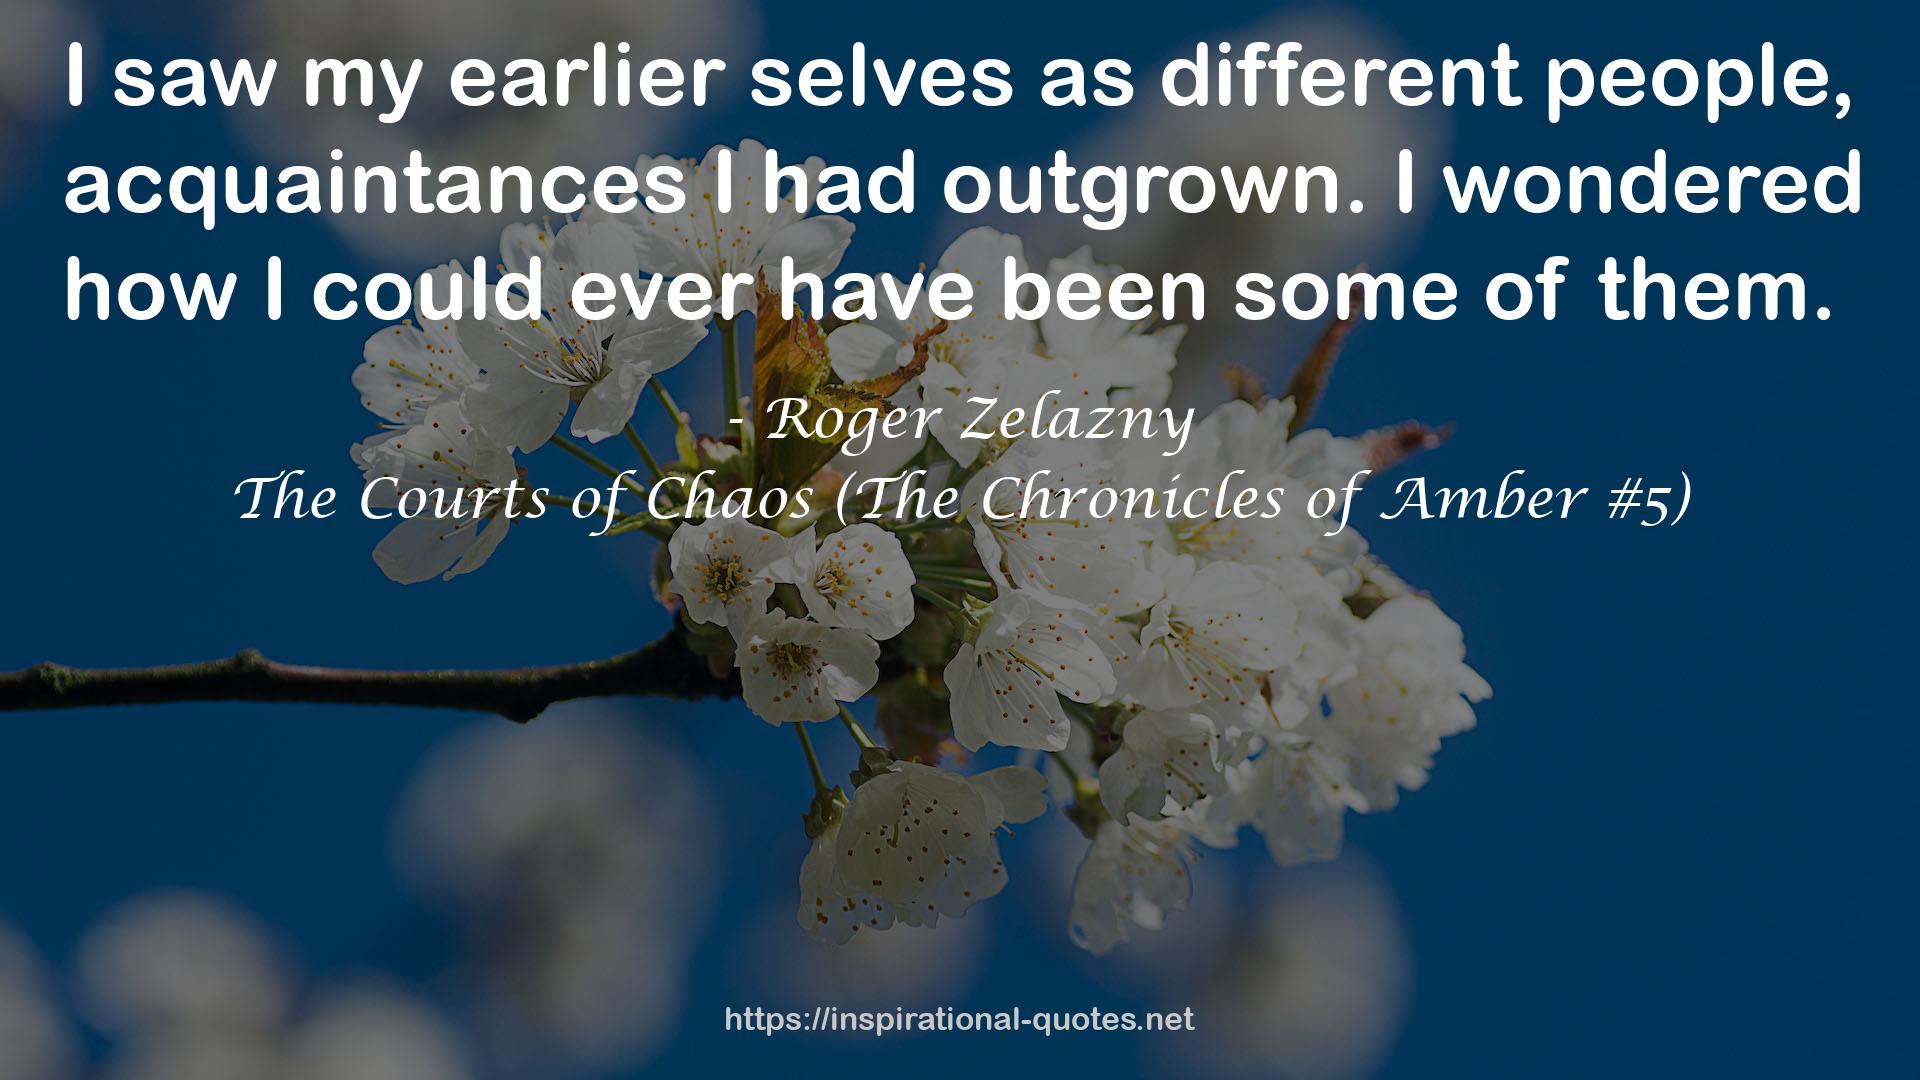 The Courts of Chaos (The Chronicles of Amber #5) QUOTES